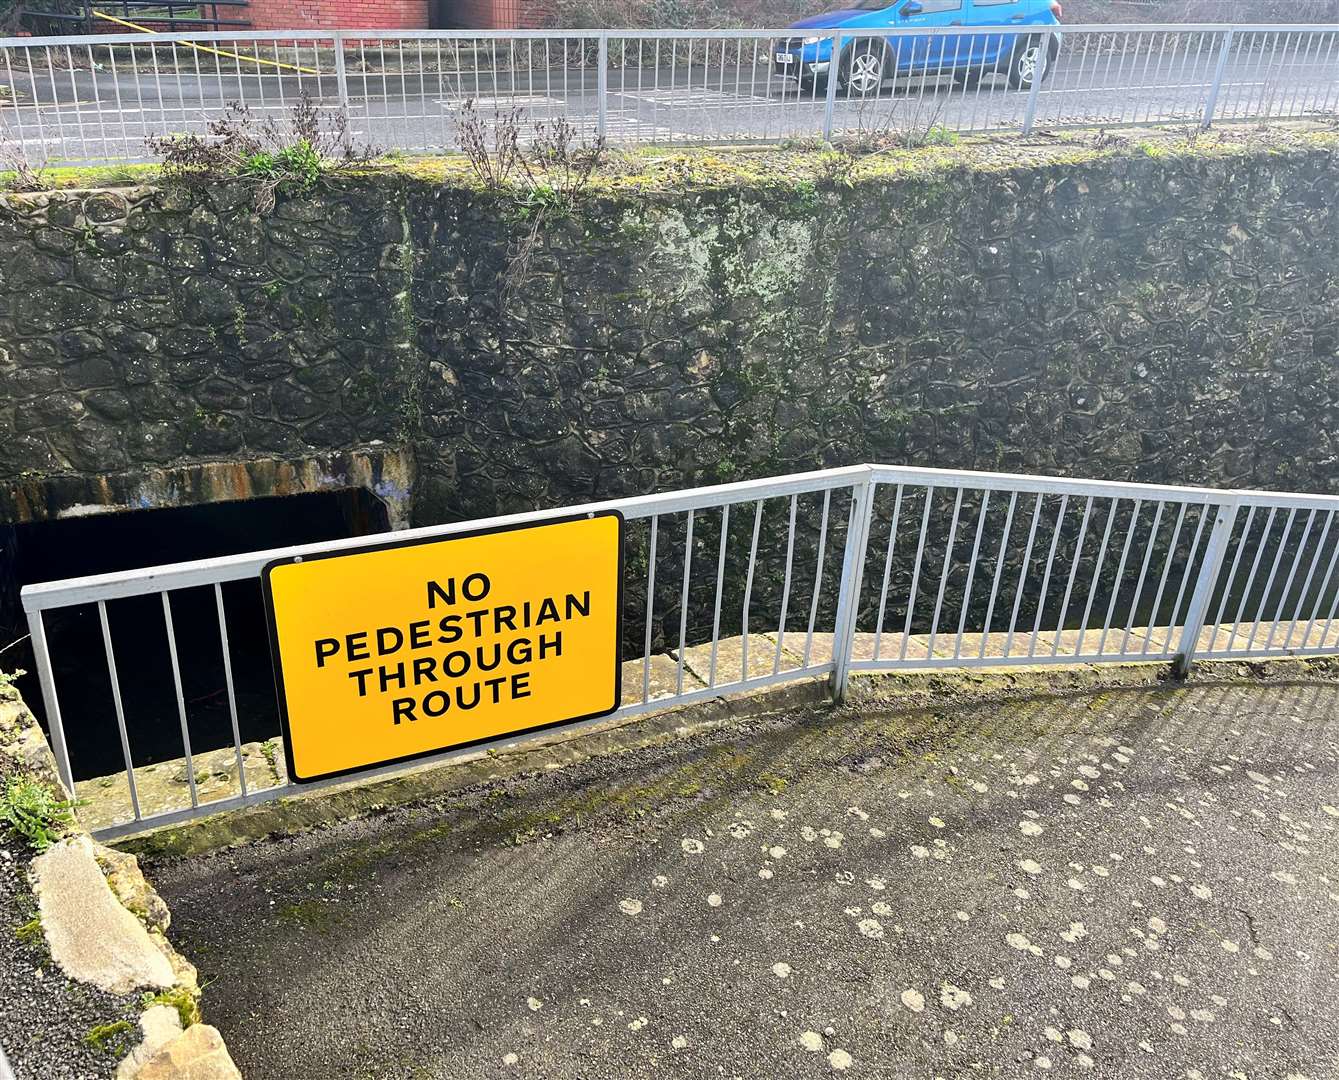 A sign above the entrance to the underpass which says 'no pedestrian through route'